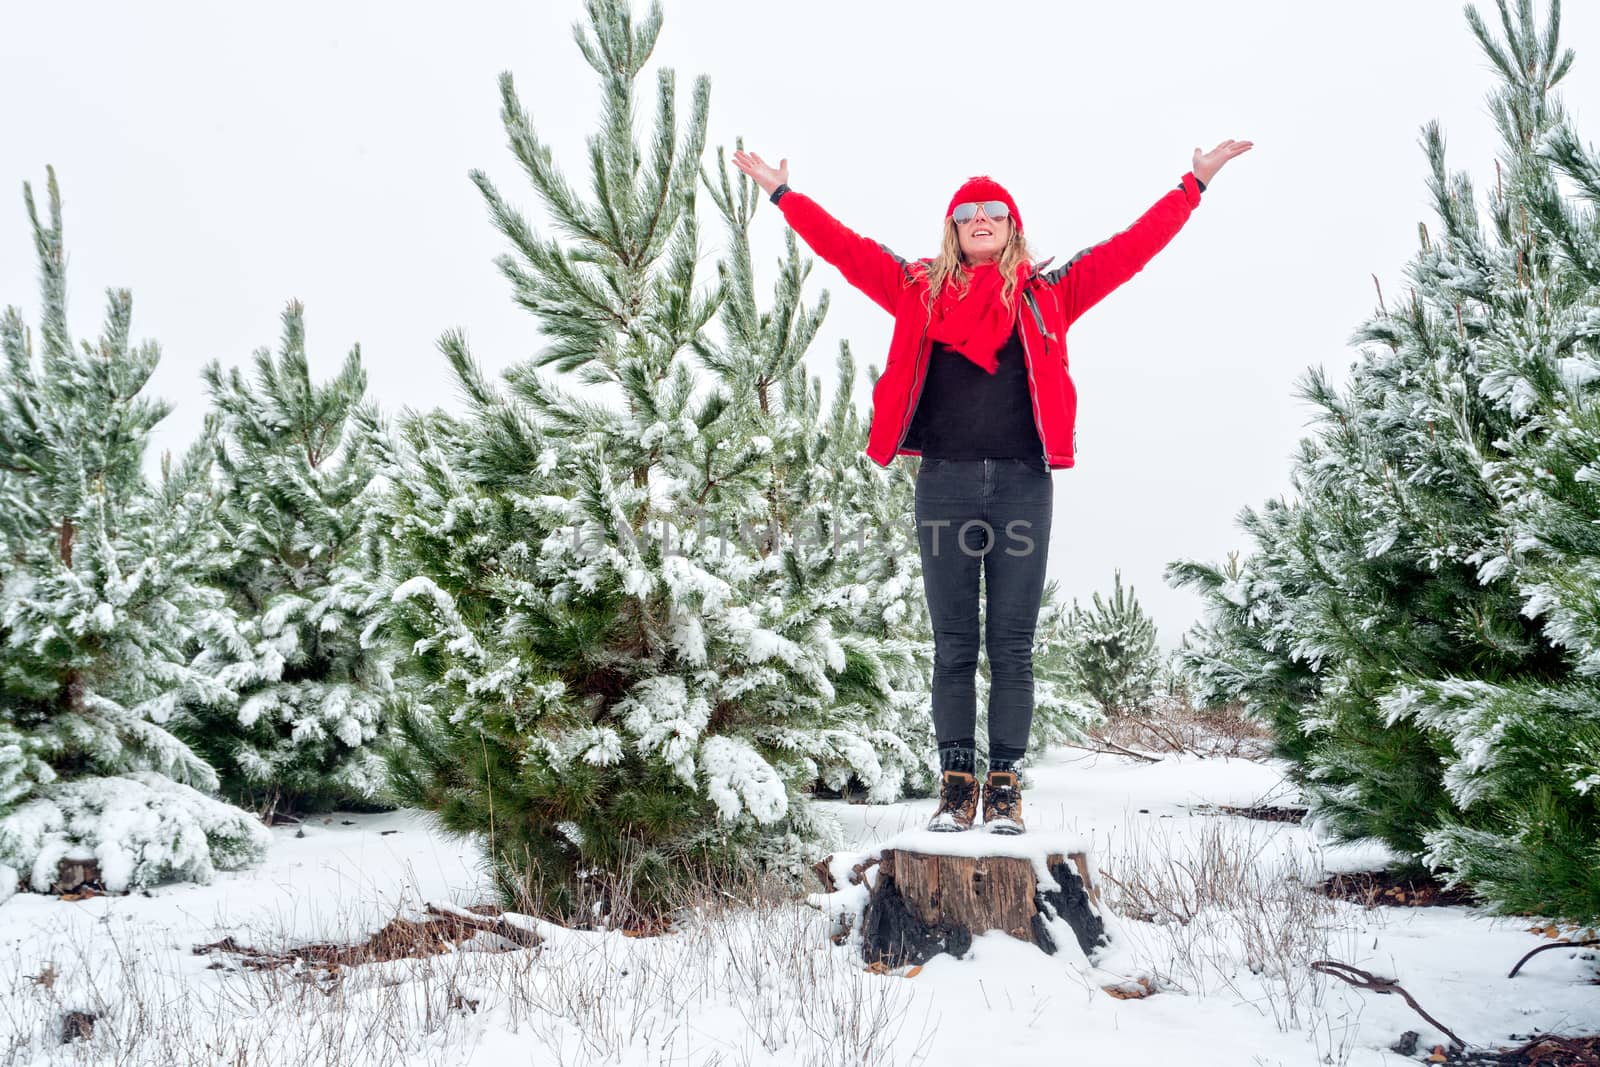 Ahh the smell of pine forests.  Standing on a tree stump in a young planted pine forest covered in fresh white snow